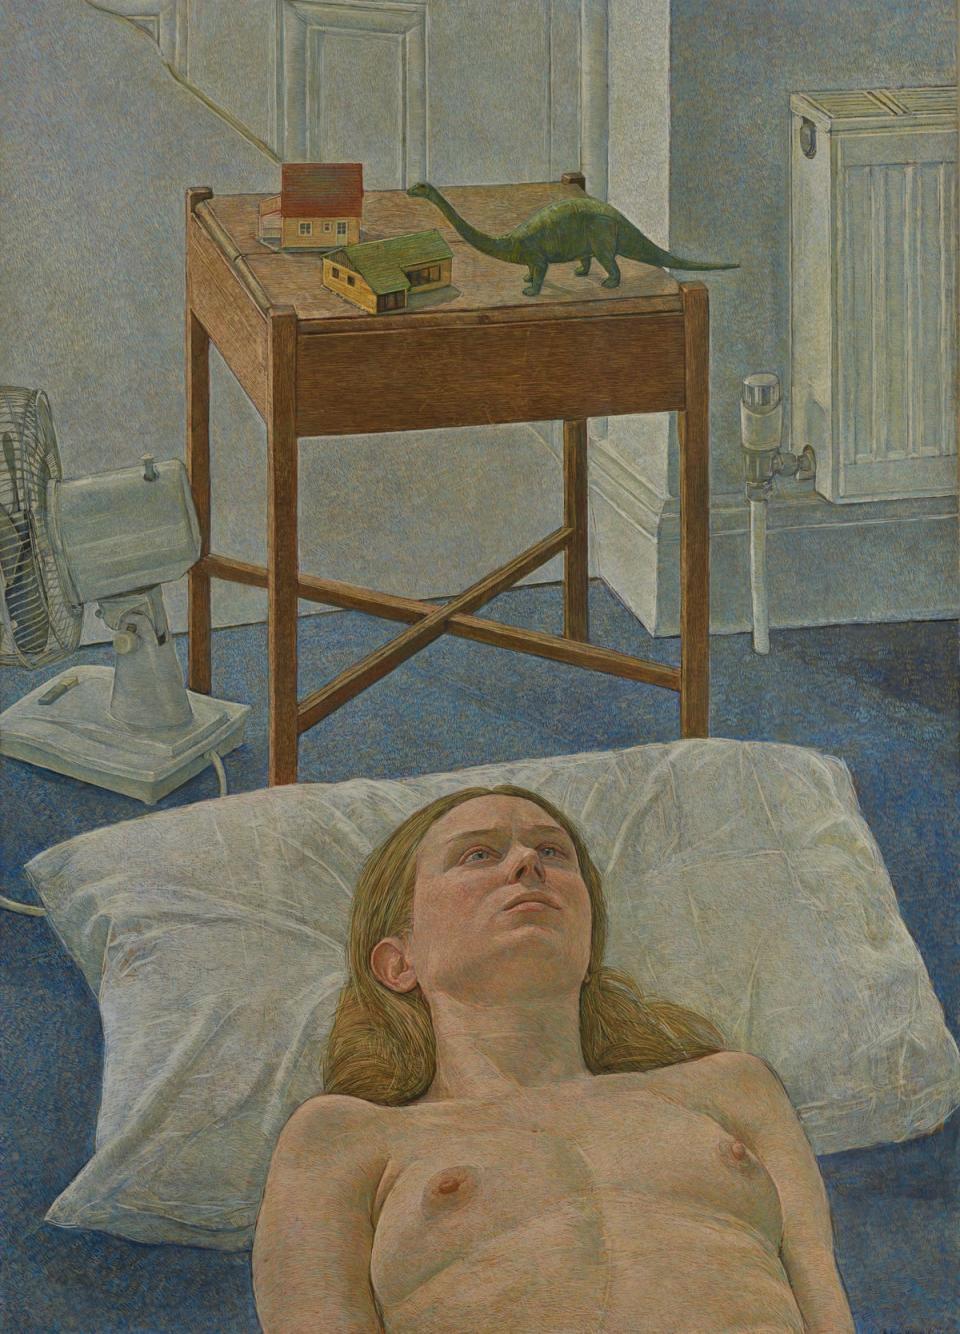 Antony Williams, Jacqueline with Still Life, 2020 (Courtesy of the artist and National Portrait Gallery)